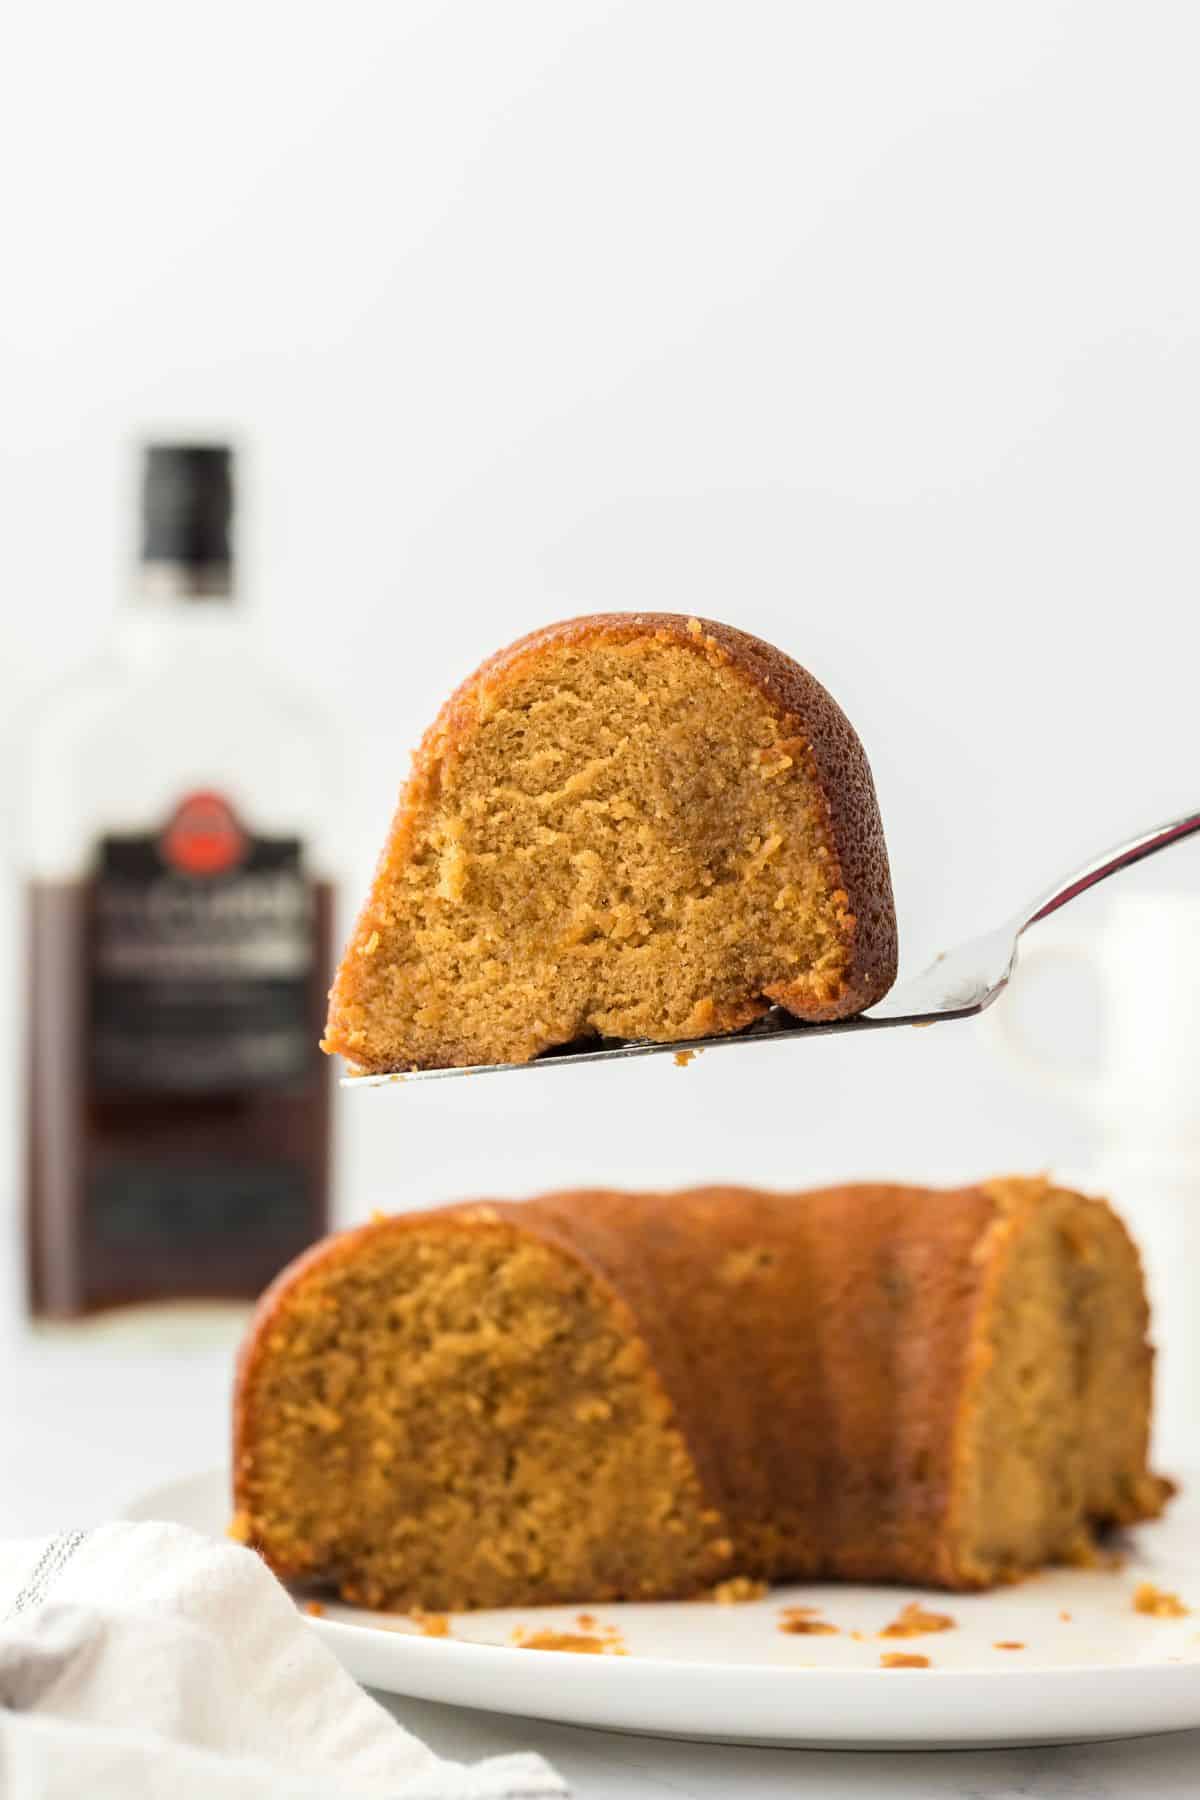 A slice of rum cake being held up on a cake server, with the rest of the cake visible on a plate and a bottle of rum in the background